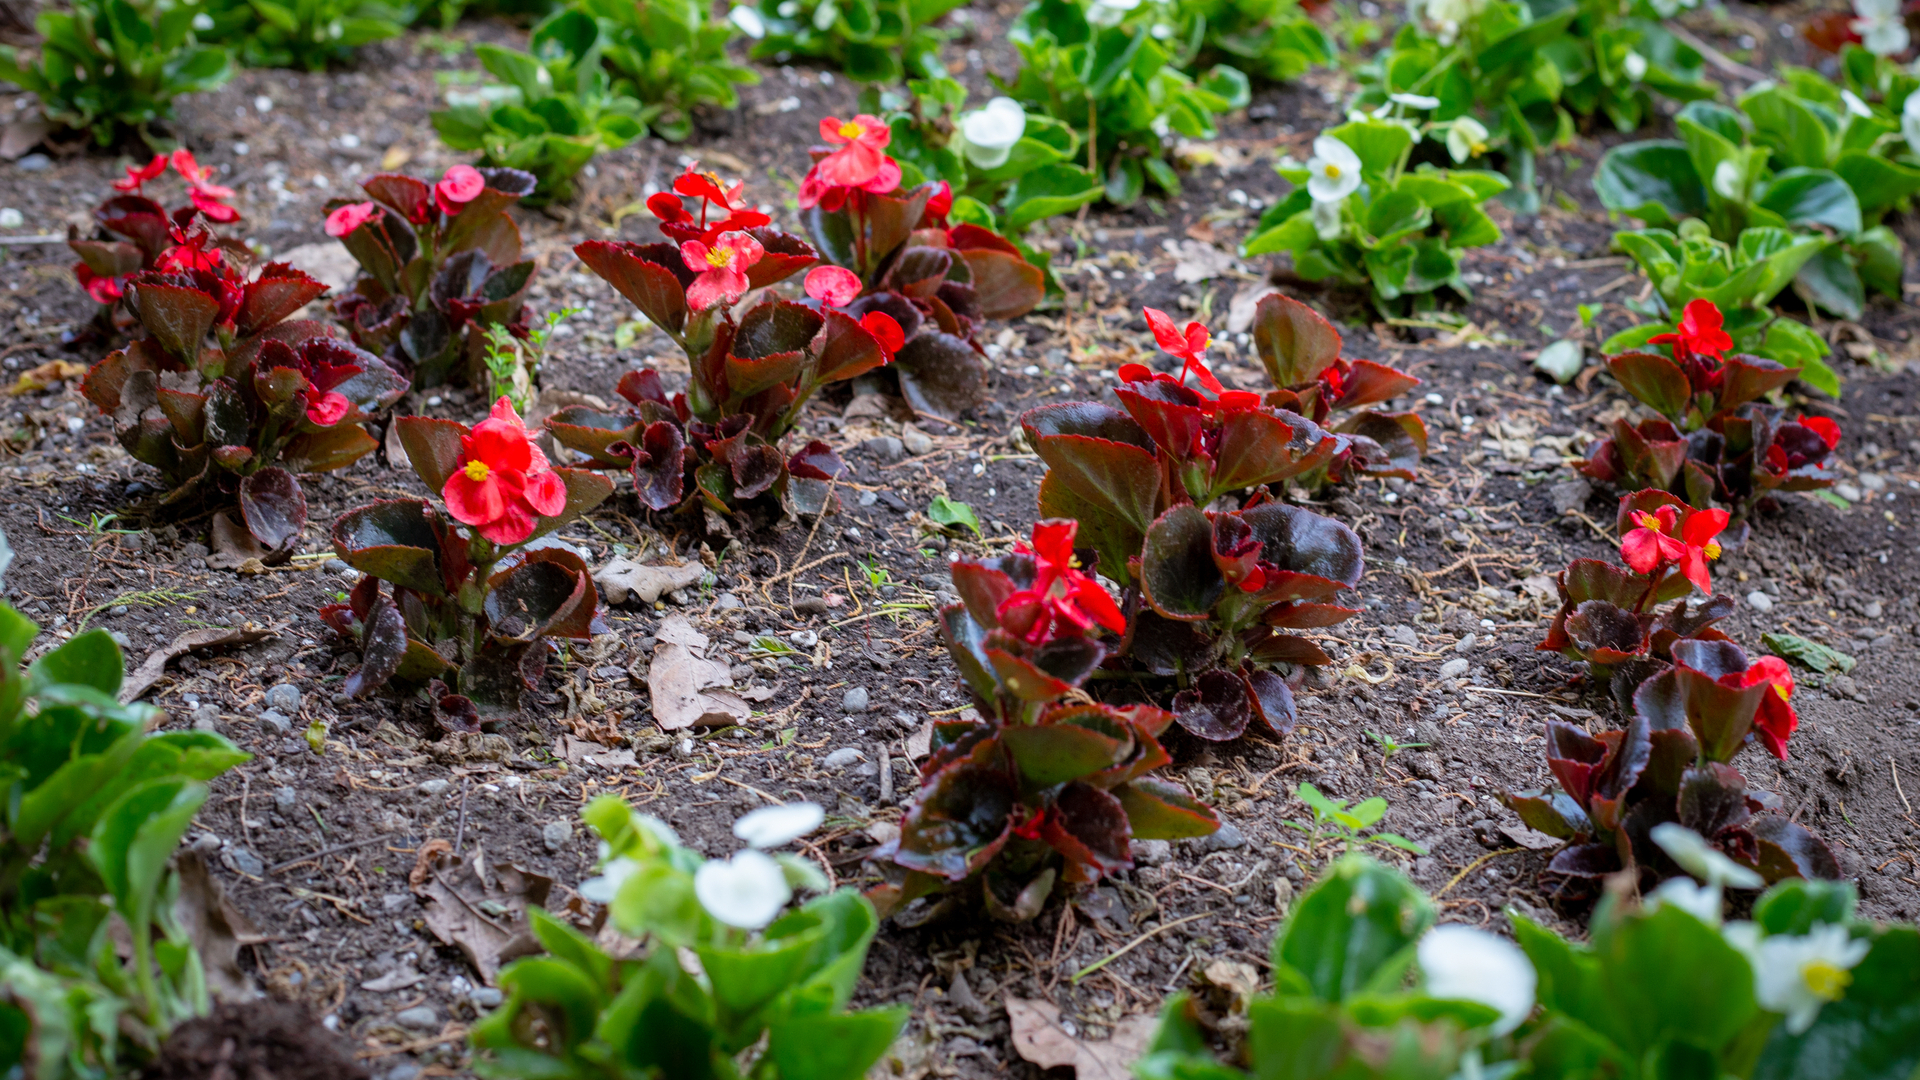 3 Ways to Keep Your Landscape Beds Looking Their Best